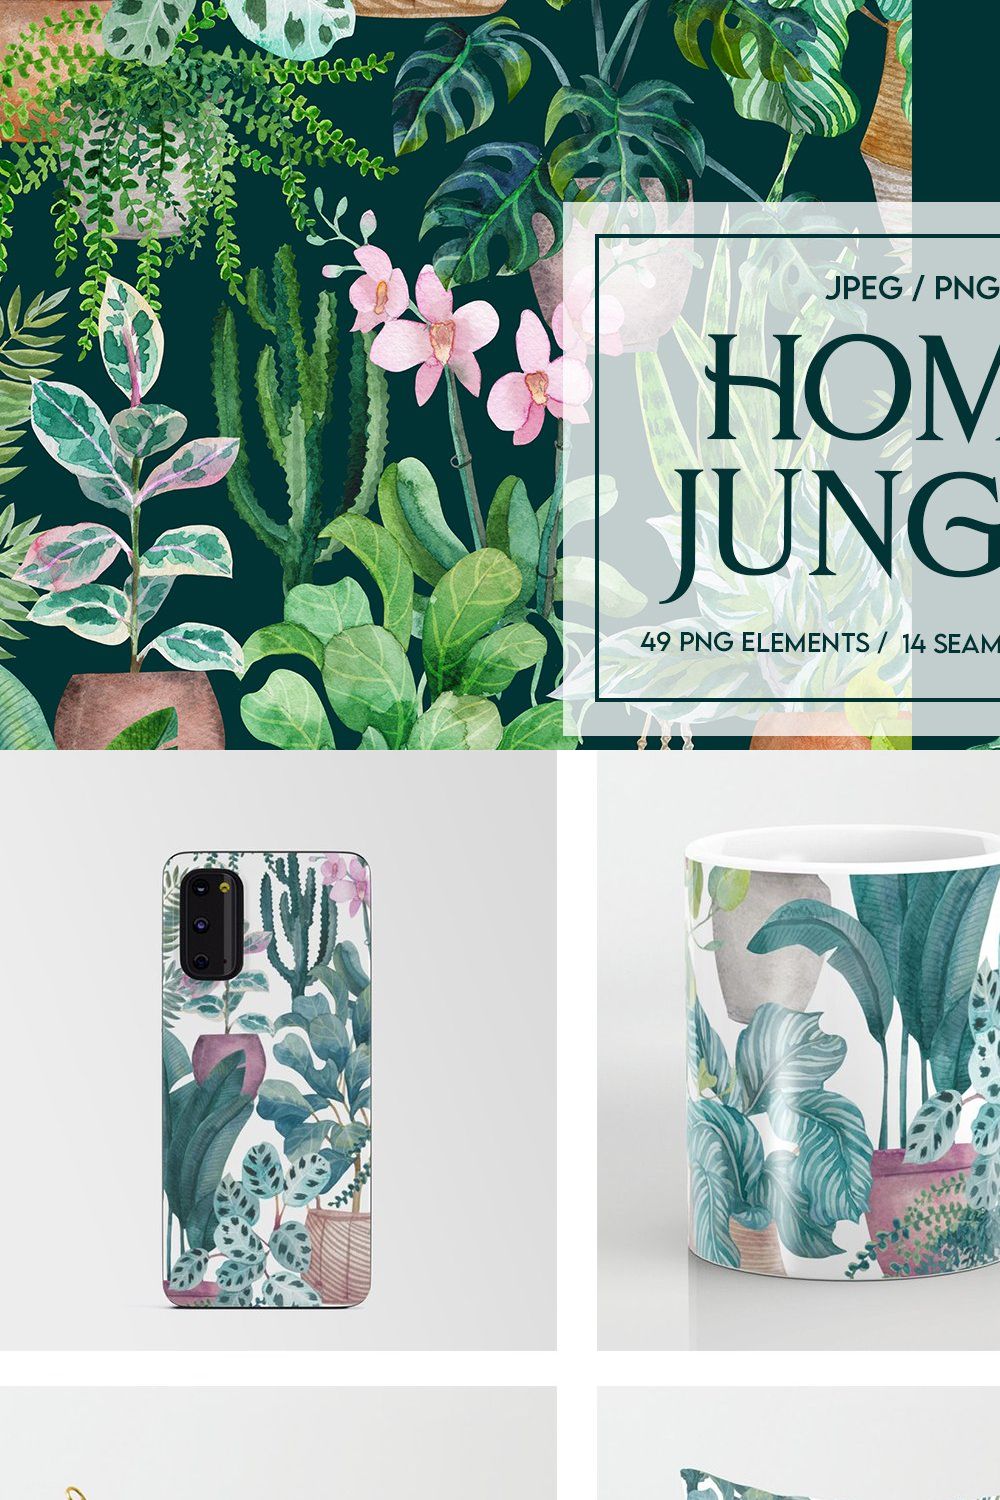 Home jungle pinterest preview image.